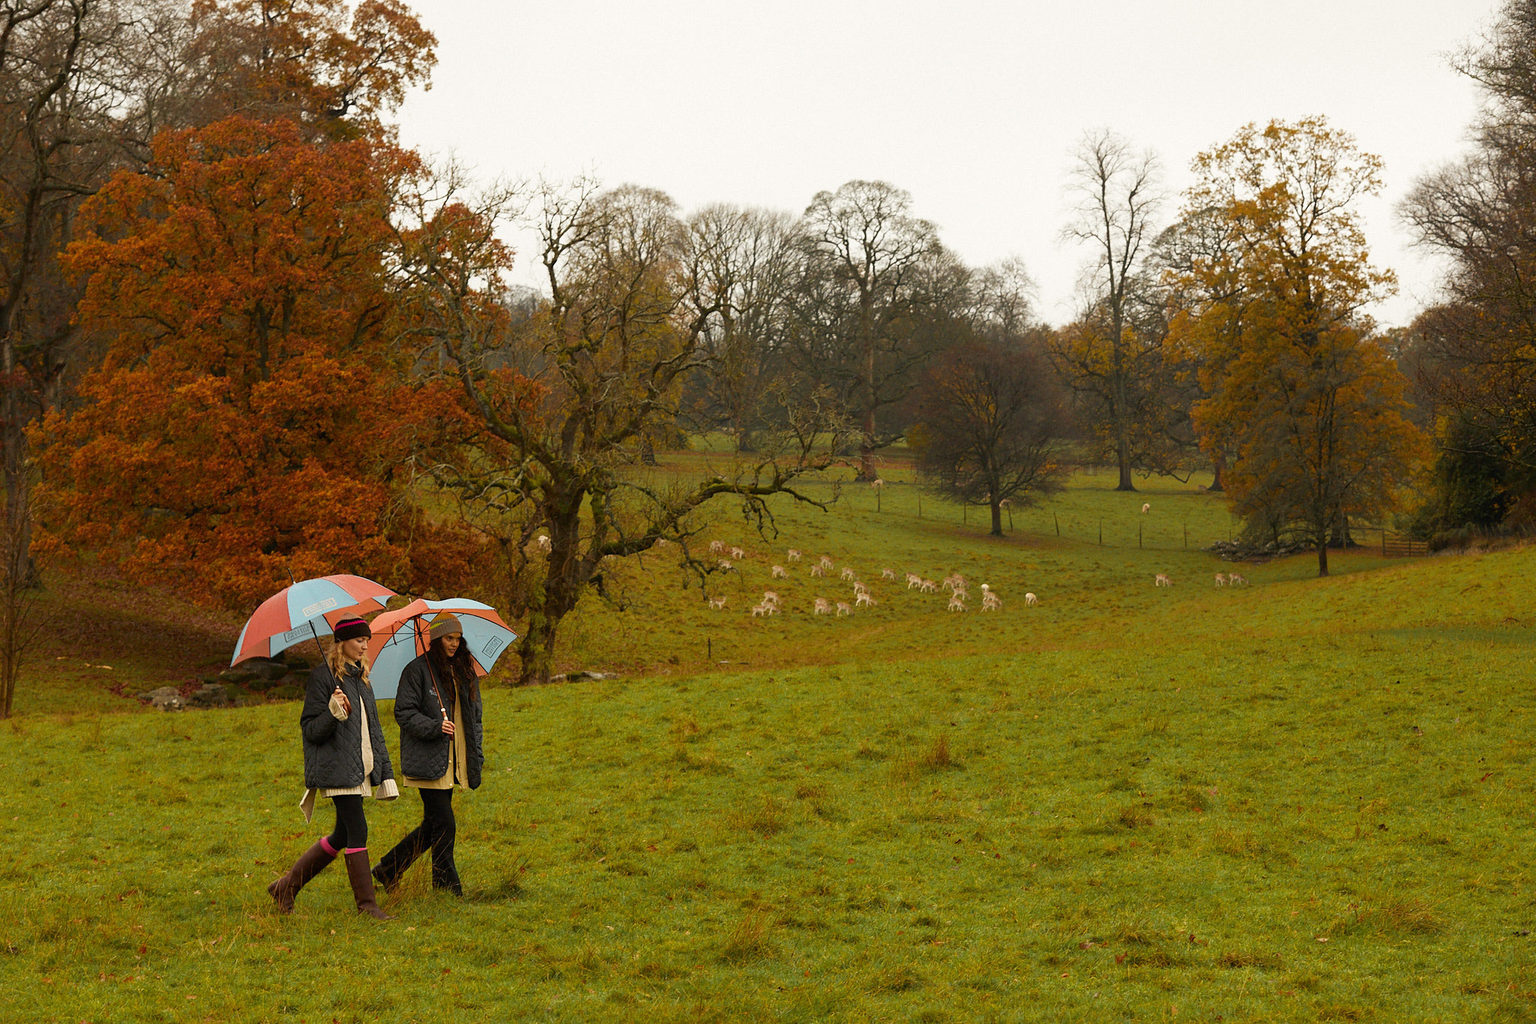 Two people from the Penelope Chilvers brand holding umbrellas as they walk through the Deer Park on the Swinton Estate during a business press trip